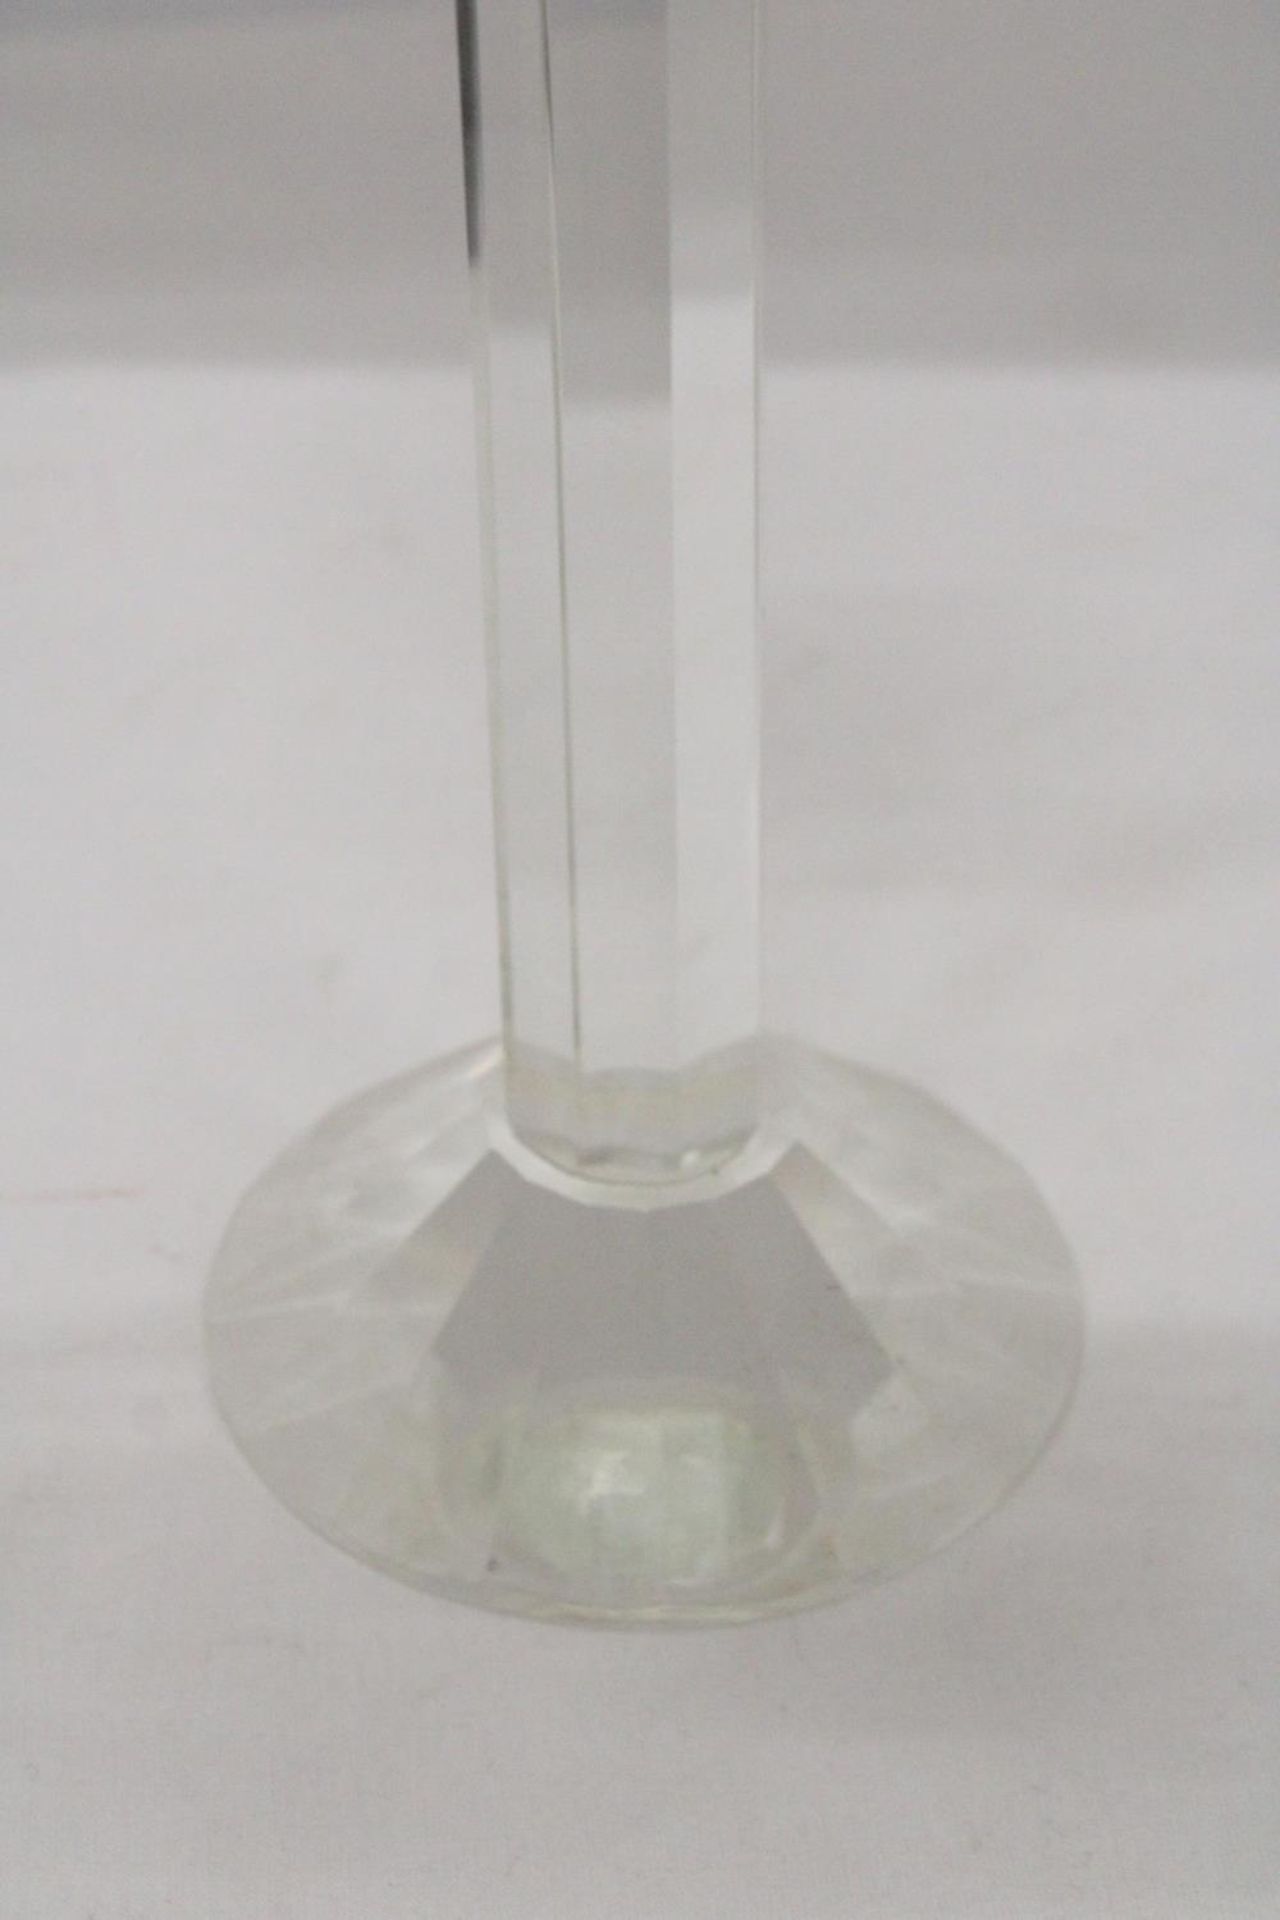 A PAIR OF GLASS CANDLESTICKS, HEIGHT 34CM - Image 3 of 5